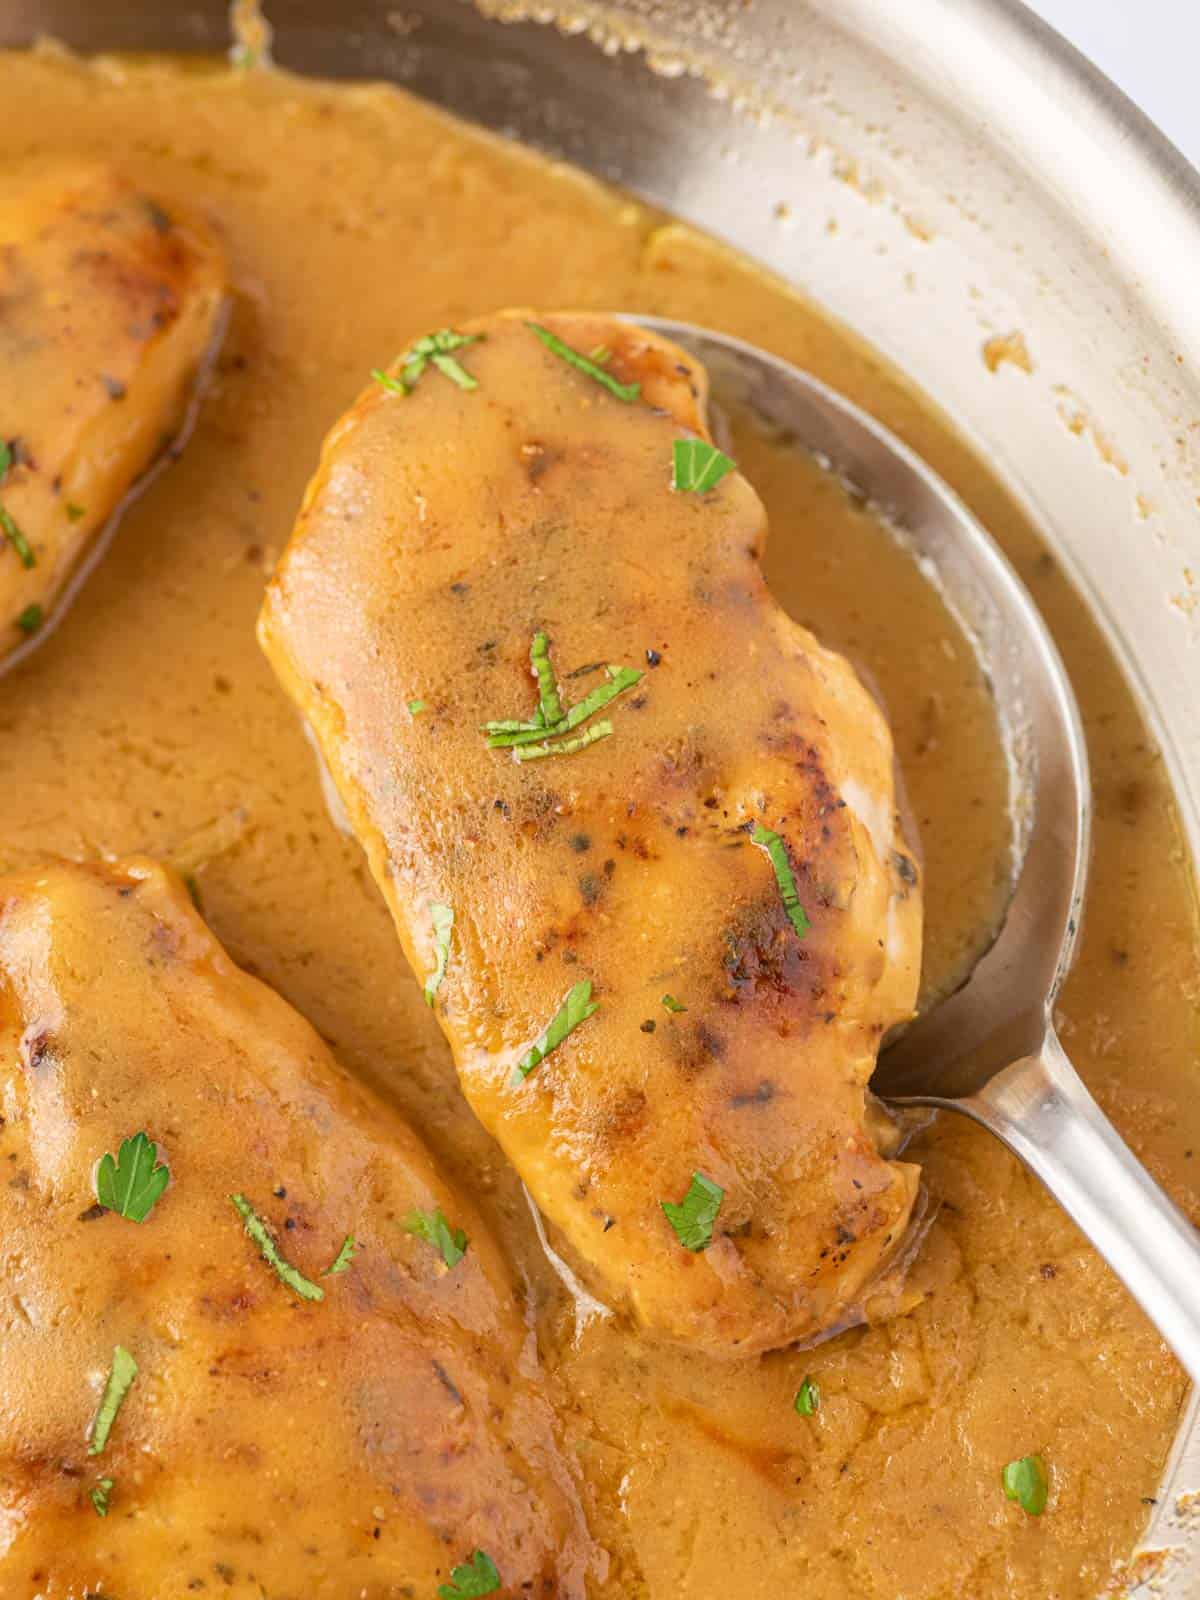 A spoon lifting a chicken breast in gravy.